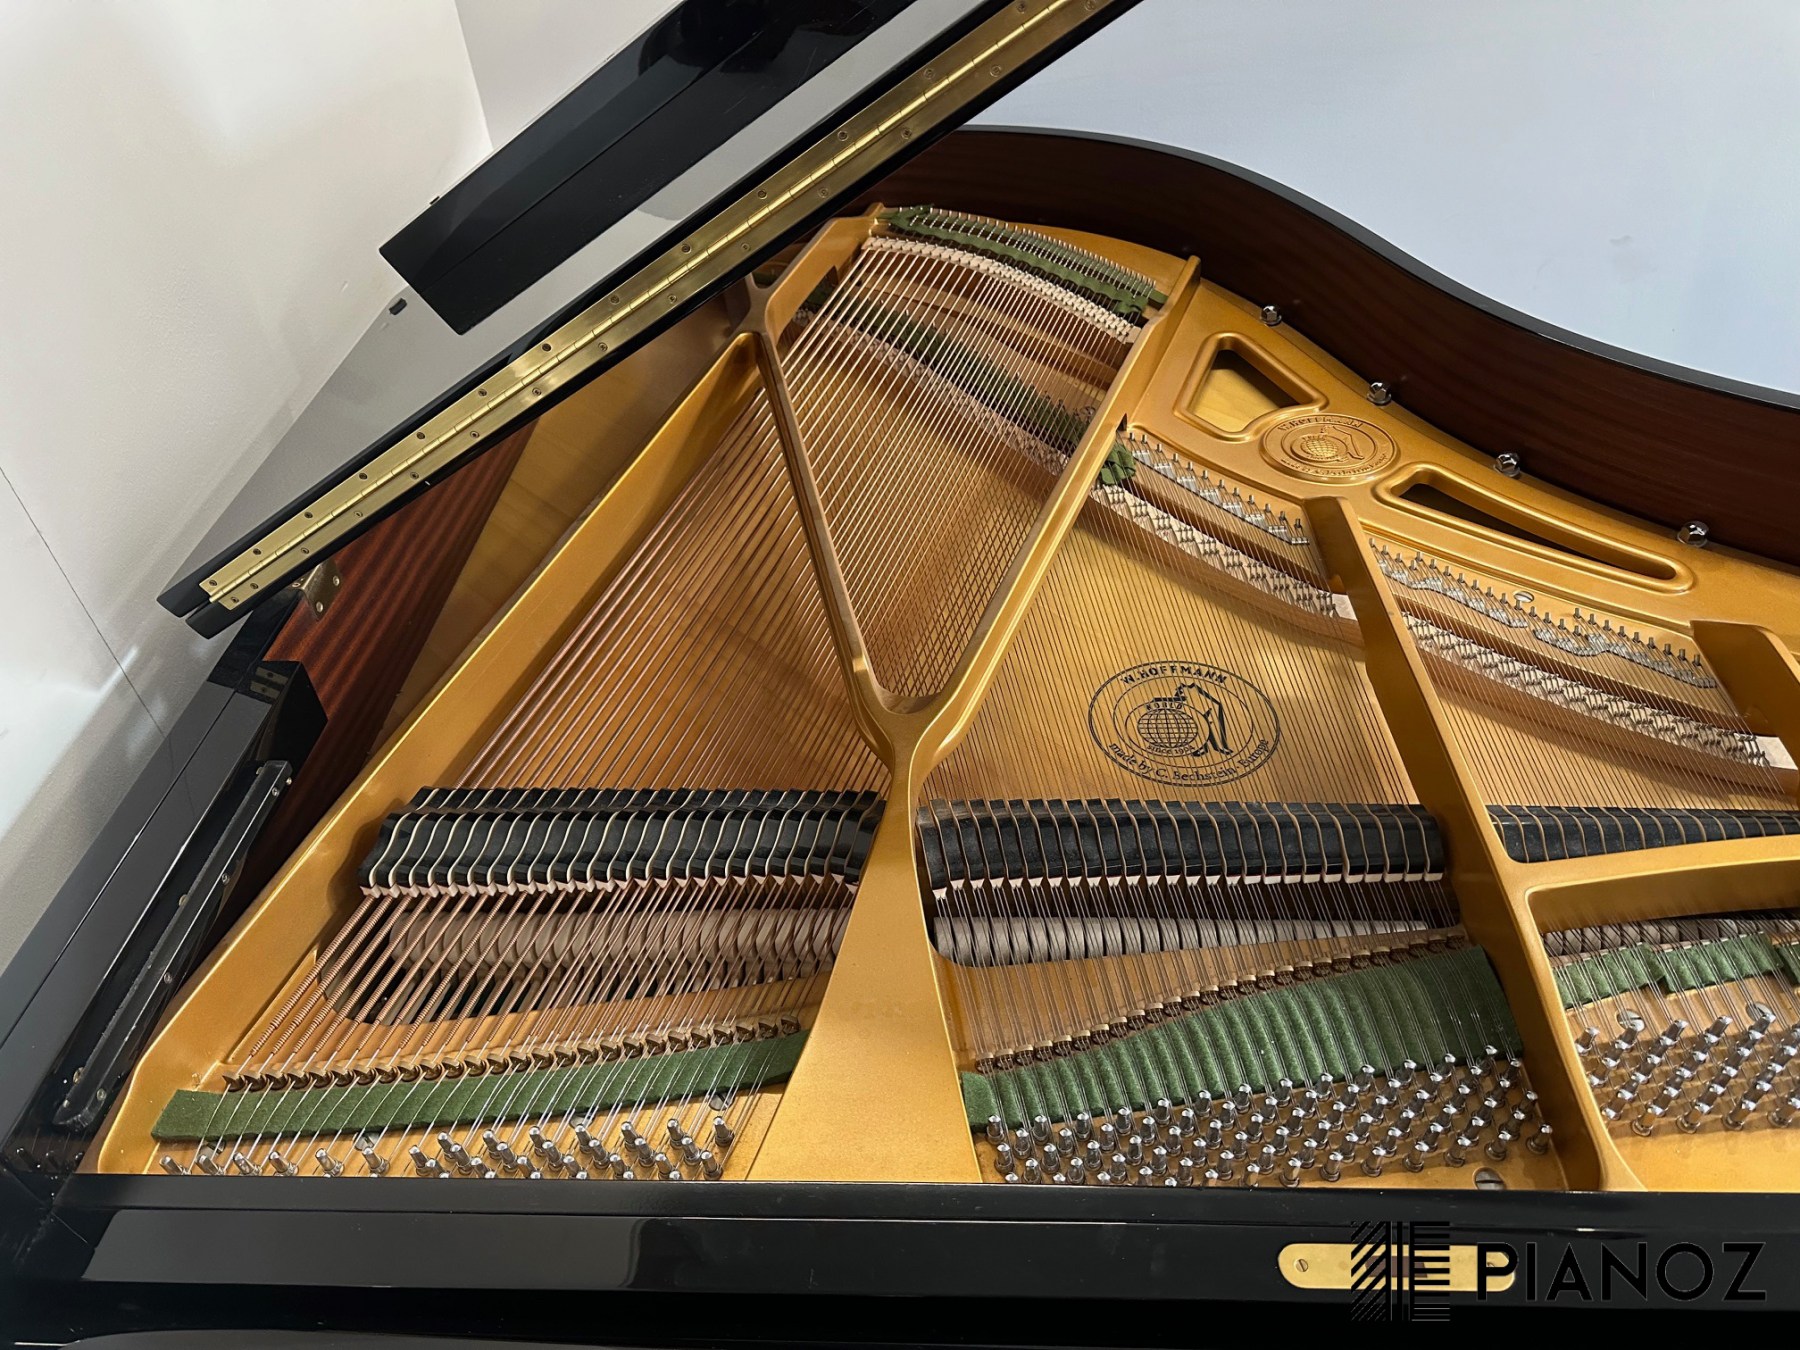 W Hoffmann Tradition T177 Baby Grand Piano piano for sale in UK